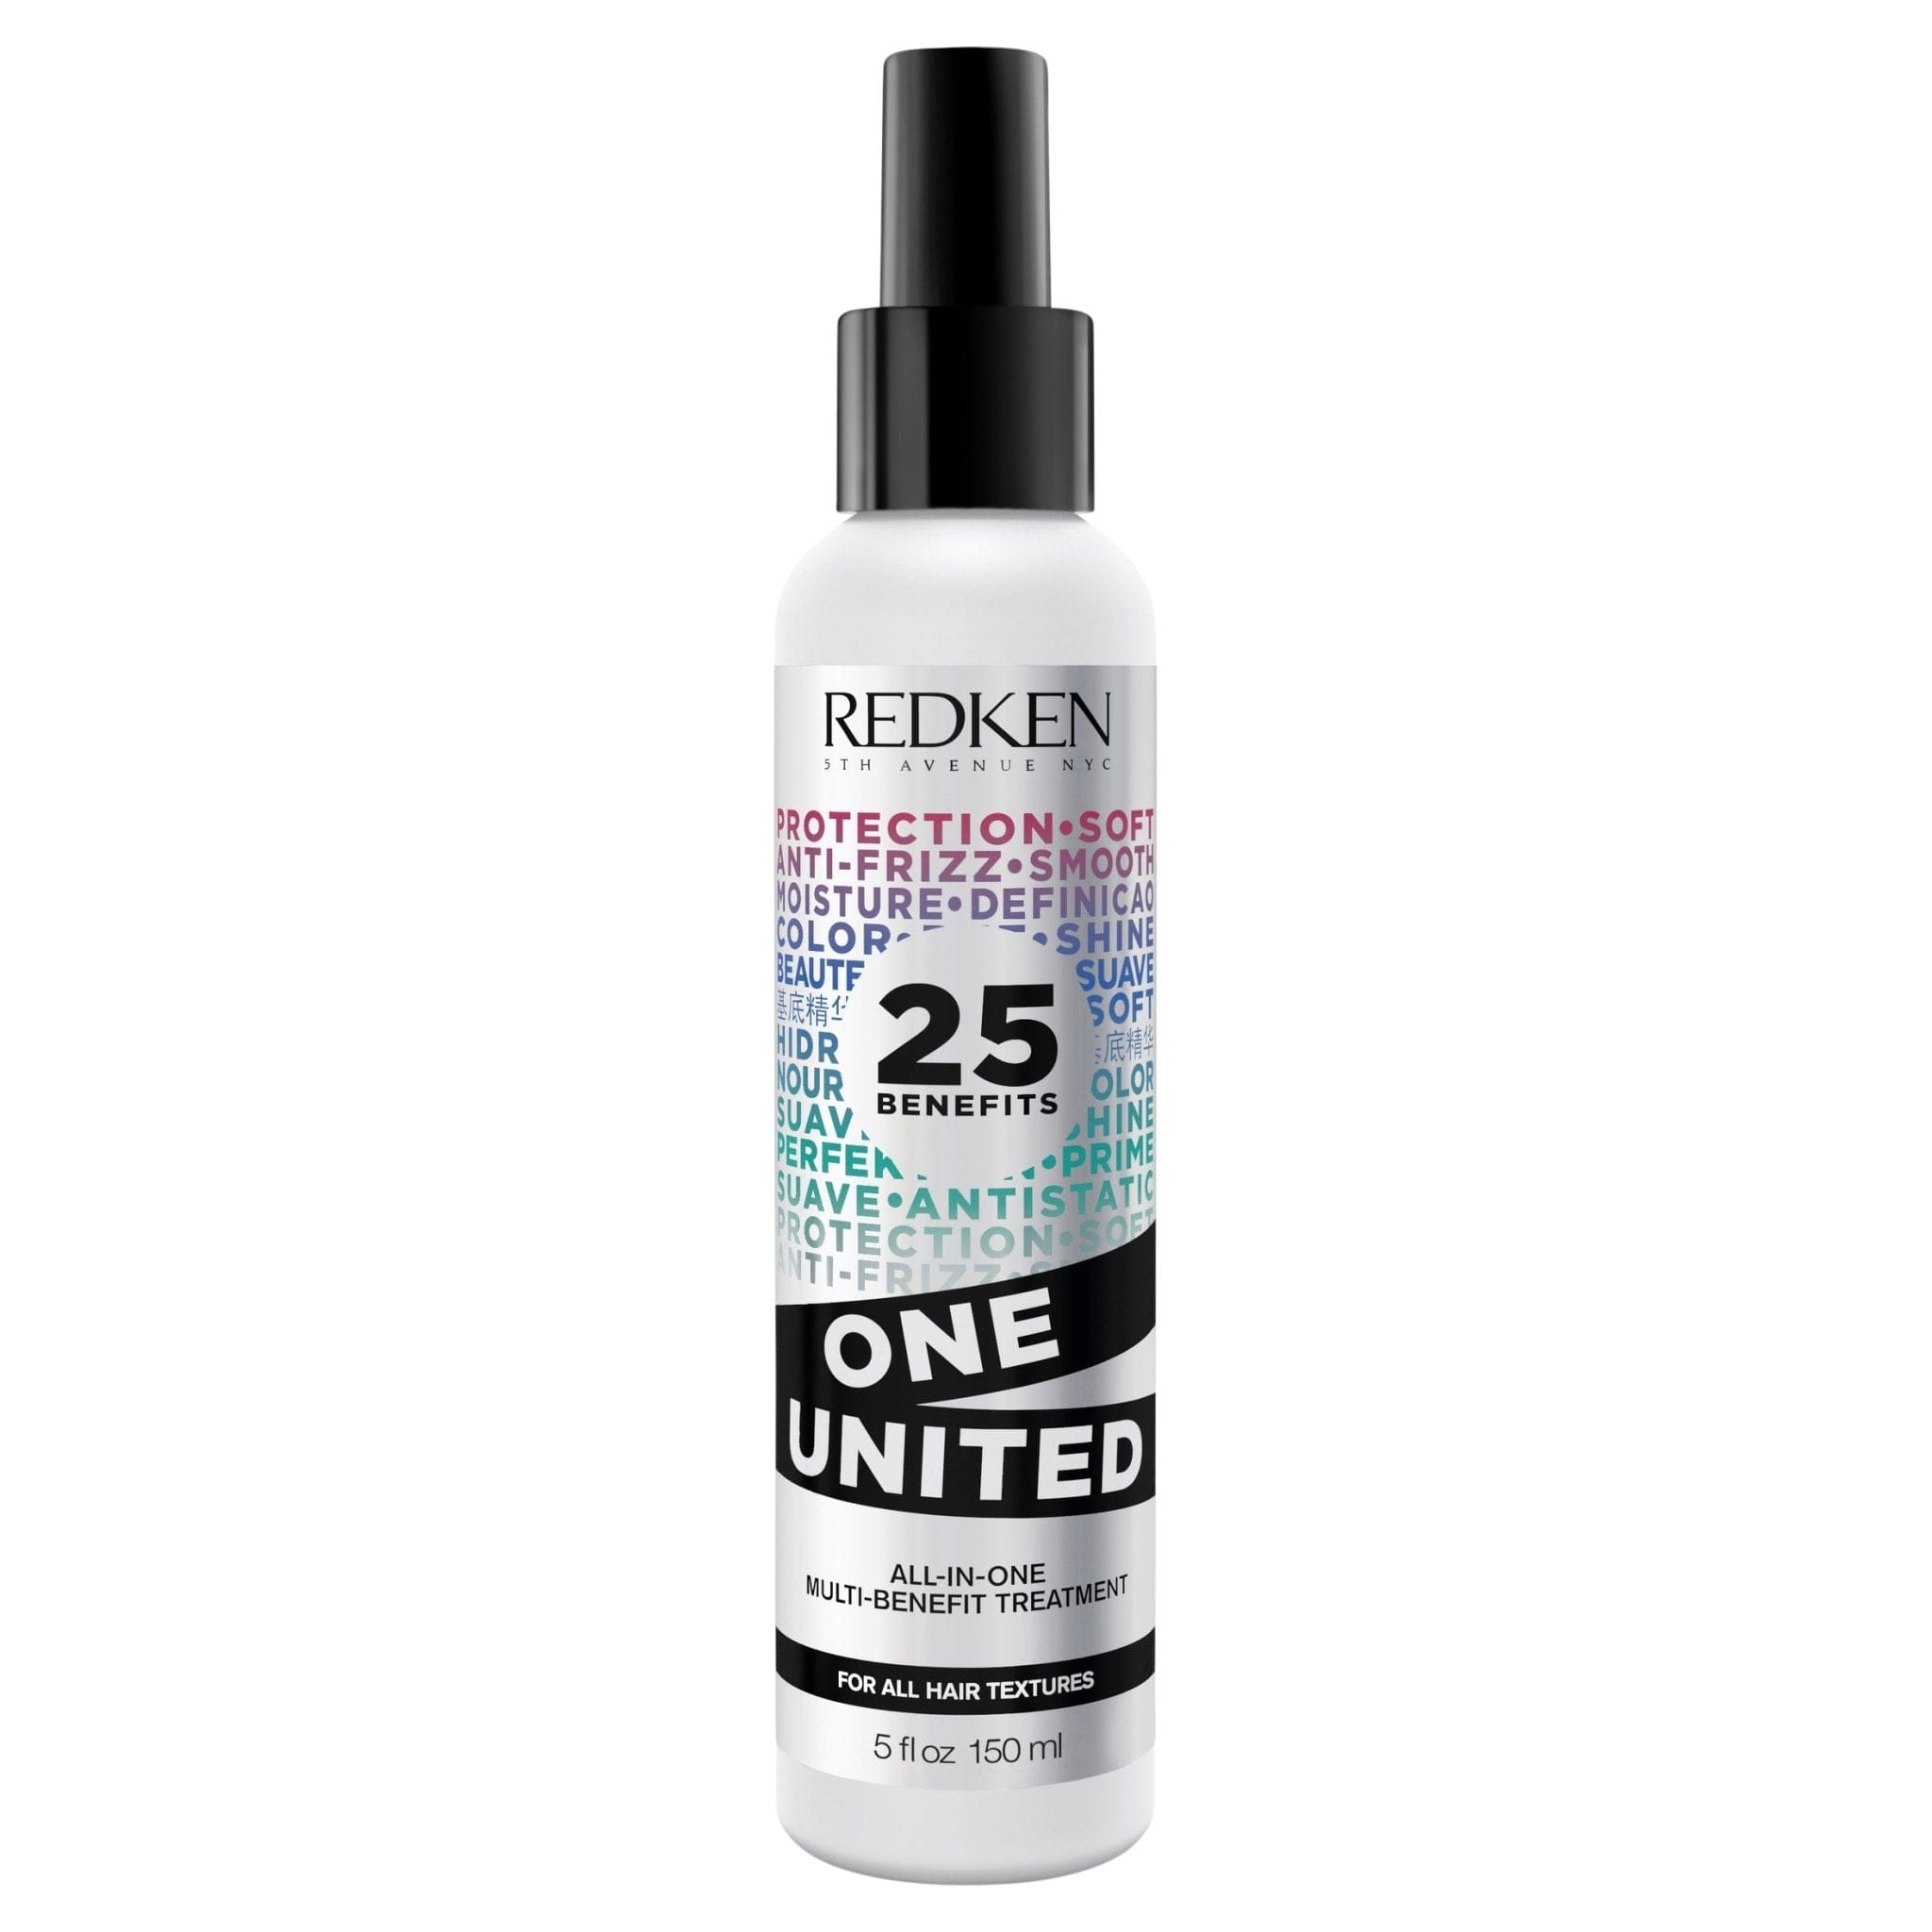 Redken® One United All-In-One Multi-Benefit Treatment - HairBeautyInk